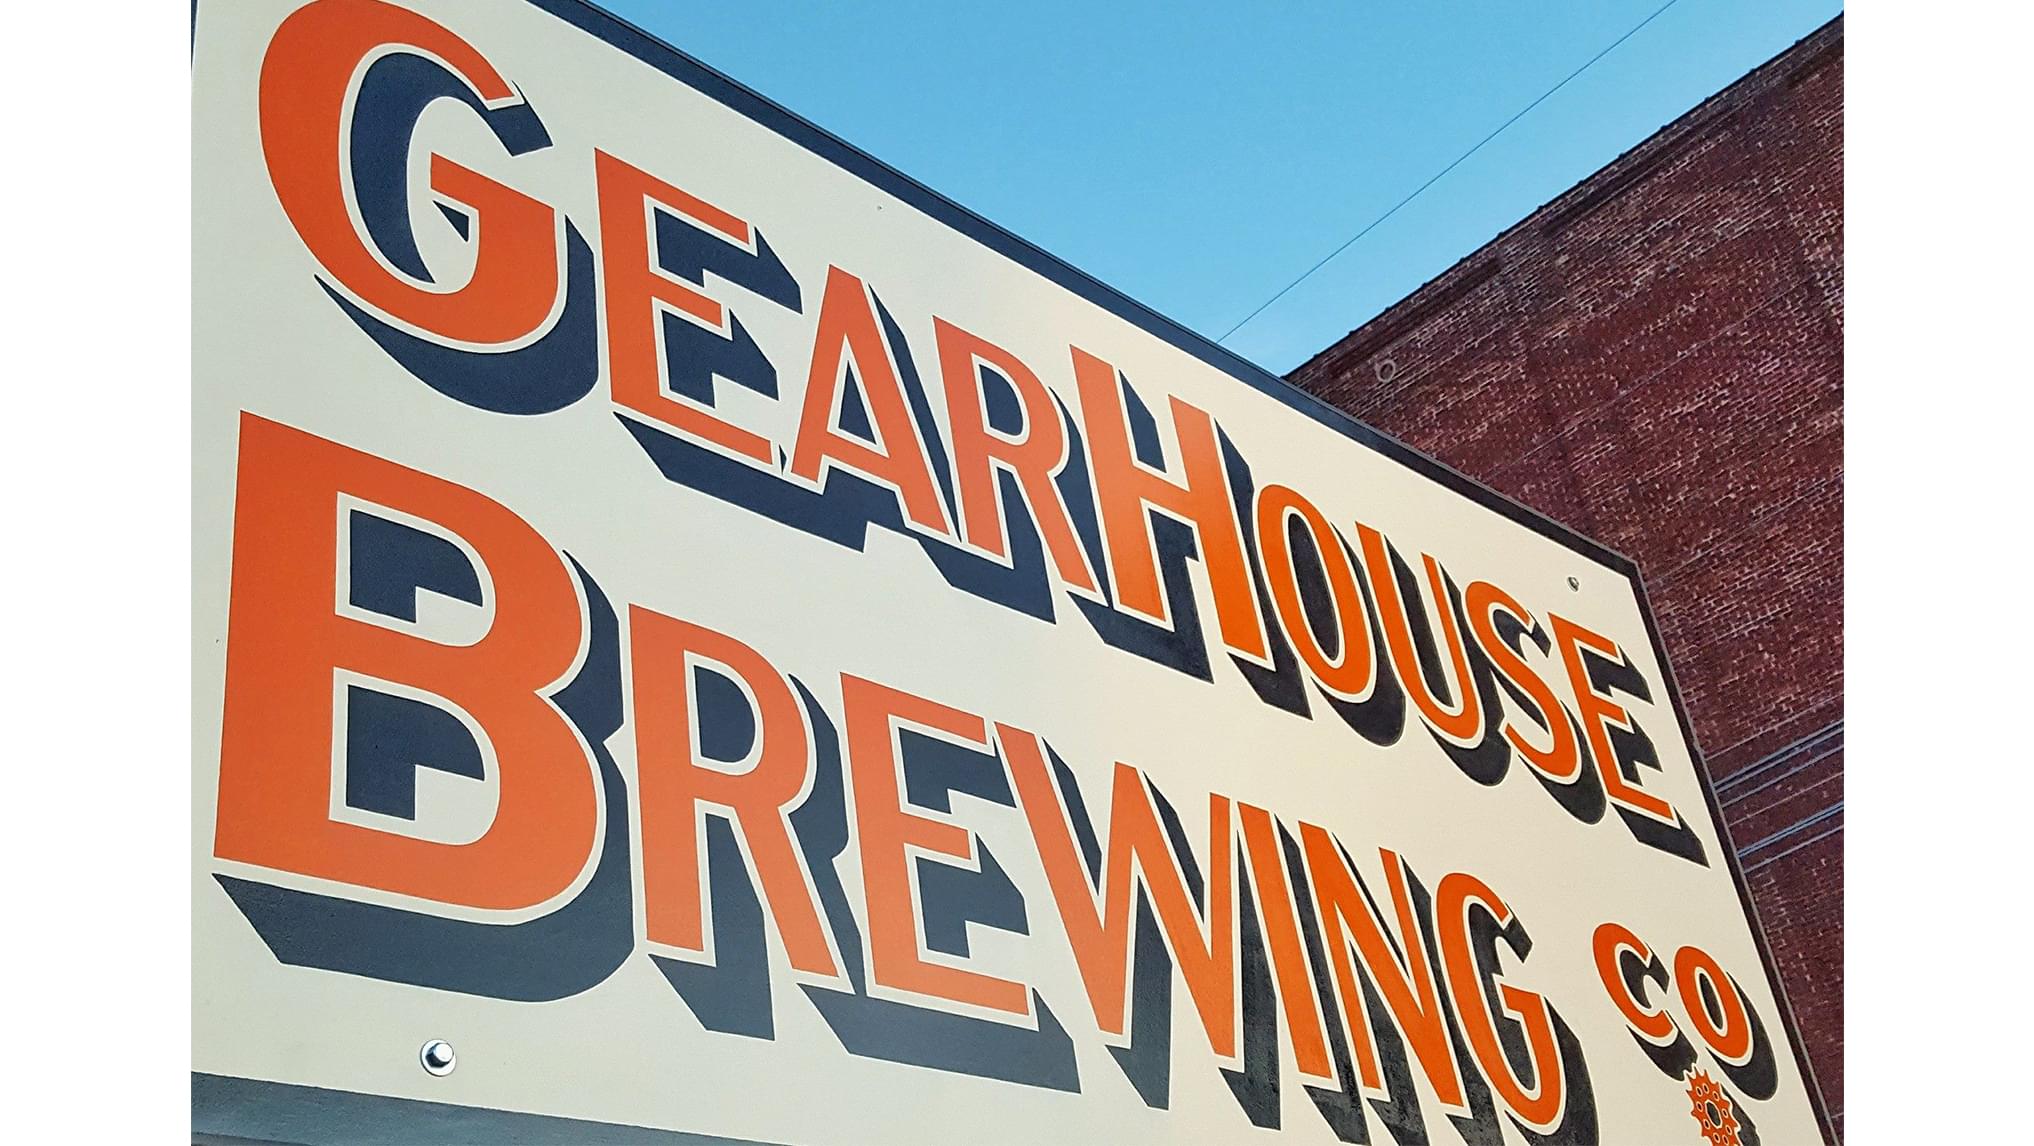 GearHouse Brewing Co.